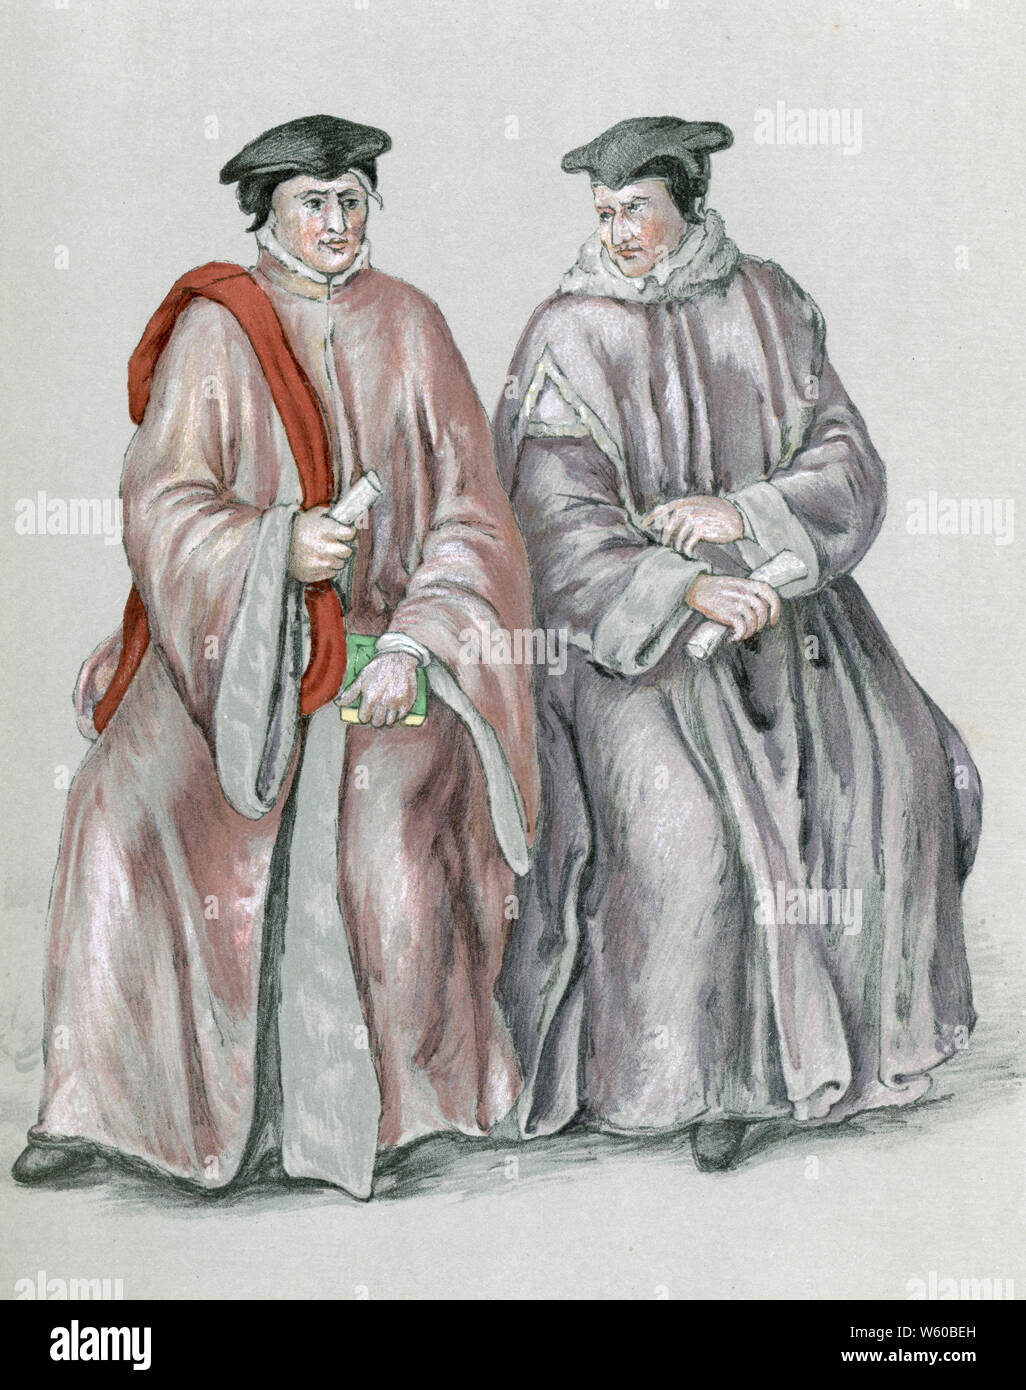 Elizabethan Judges in their robes, c16th century. Judges at the time of Elizabeth I. Stock Photo